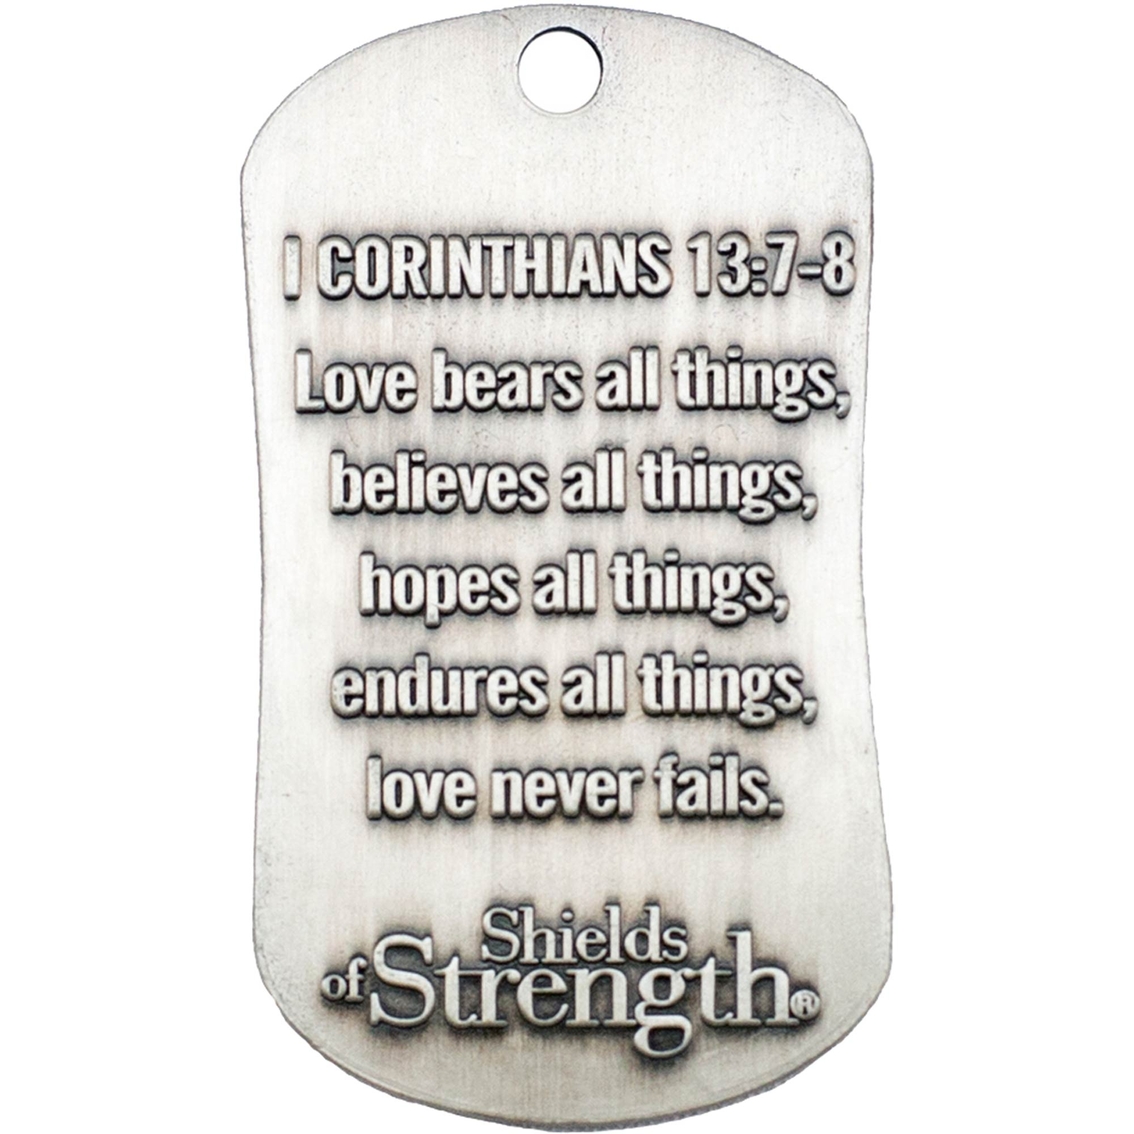 Shields of Strength Army Wife Antique Finish Dog Tag Necklace, 1 Corinthians 13:7-8 - Image 2 of 2